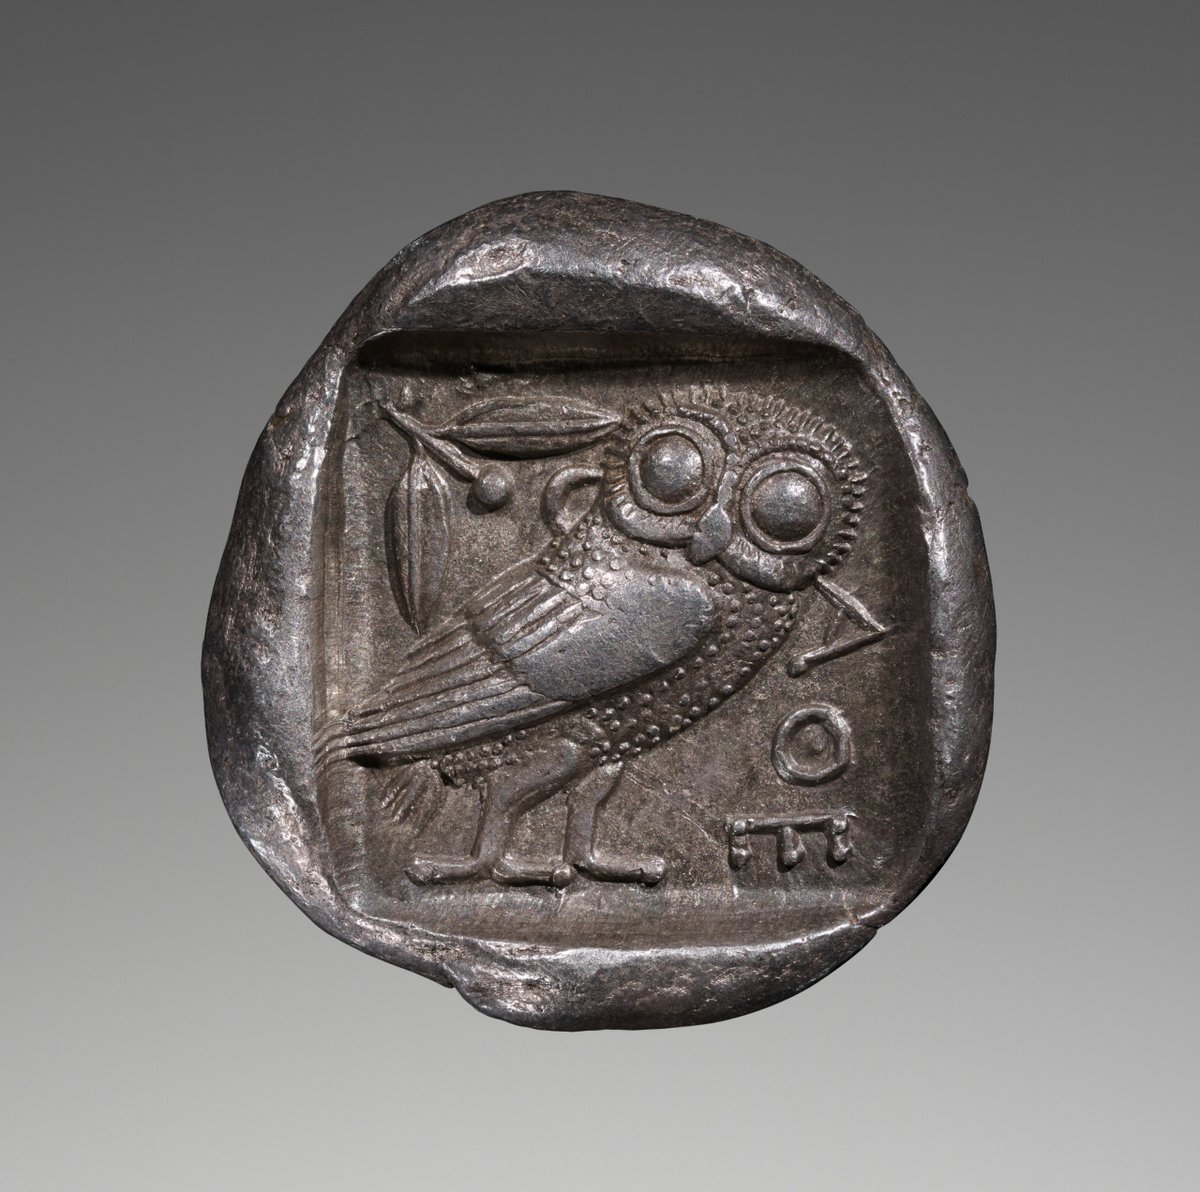 An Athenian silver tetradrachm ca. 475–465 B.C., showing Athena's owl and an olive branch. Collection: The Getty.